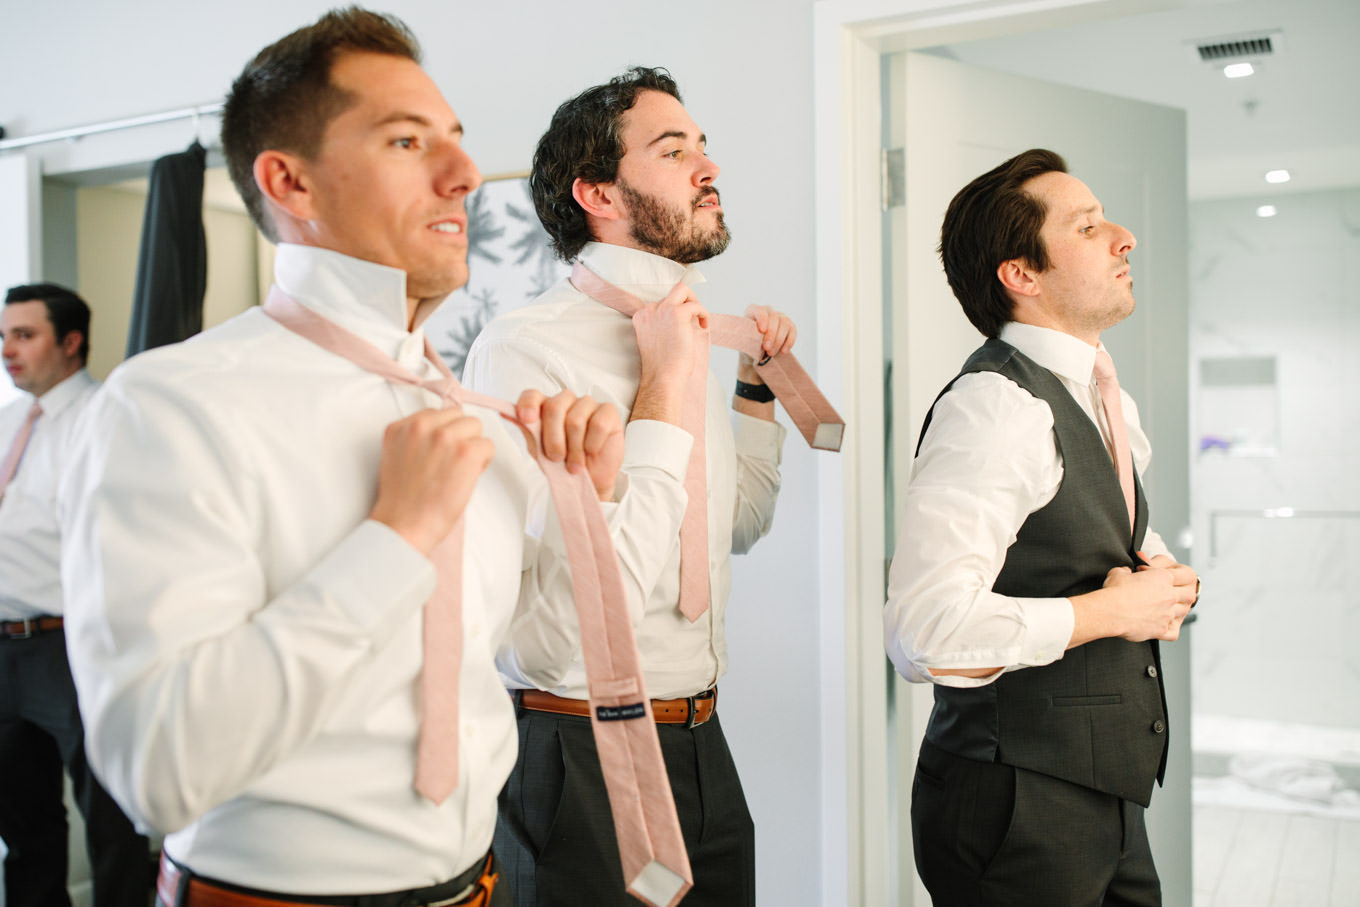 Groom and groomsmen getting ready | Living Desert Zoo & Gardens wedding with unique details | Elevated and colorful wedding photography for fun-loving couples in Southern California |  #PalmSprings #palmspringsphotographer #gardenwedding #palmspringswedding  Source: Mary Costa Photography | Los Angeles wedding photographer 